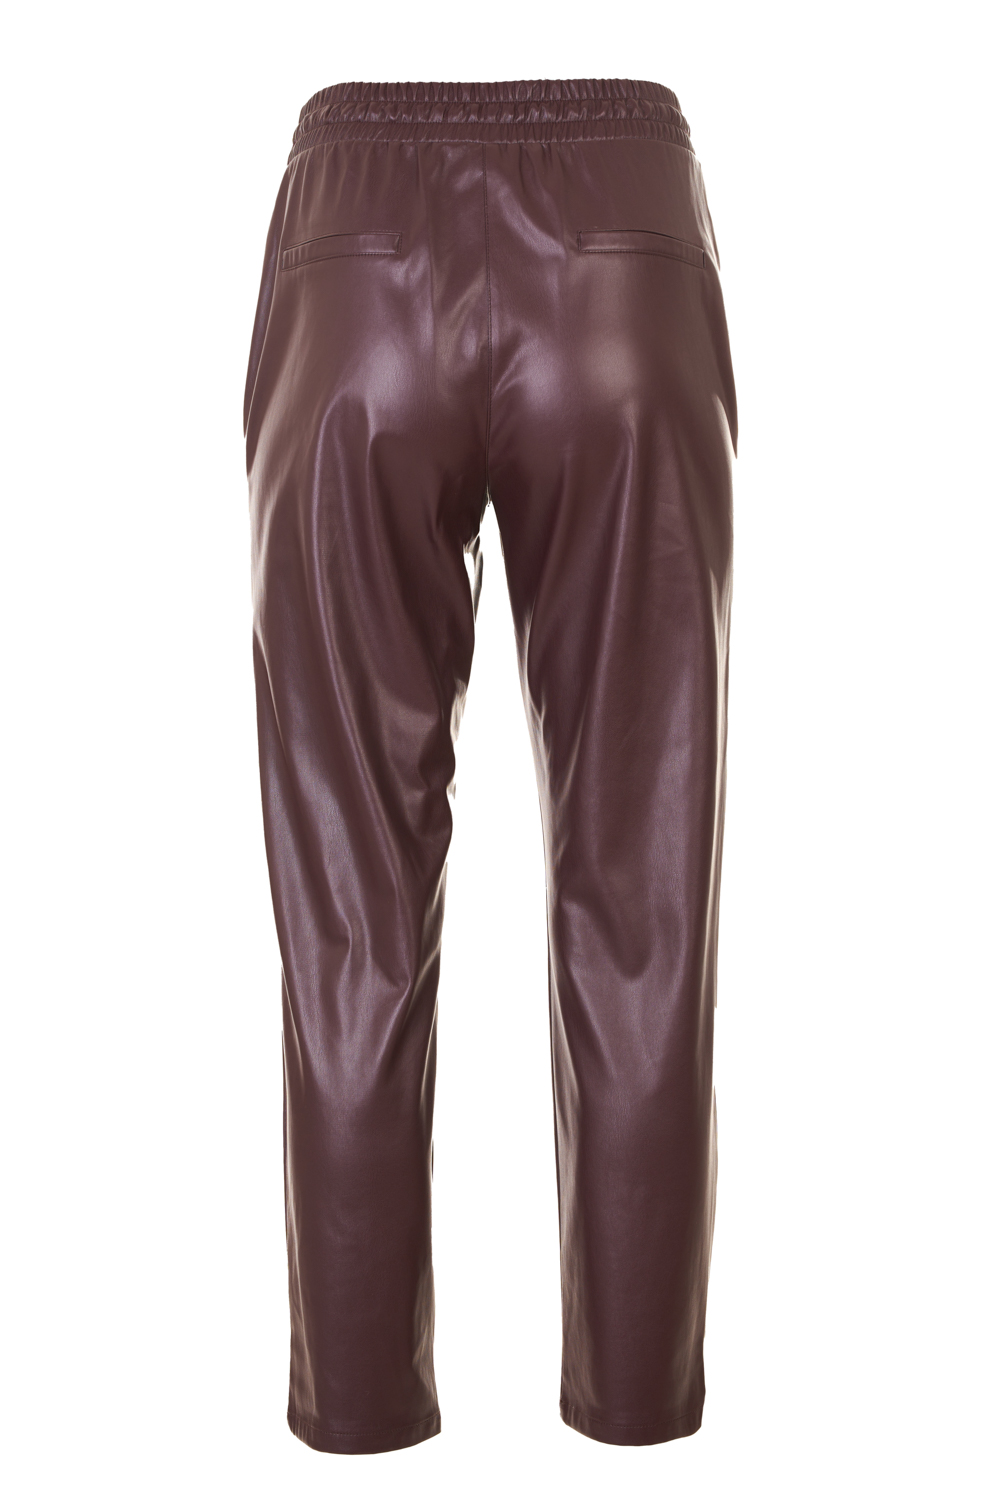 Eco Leather Trousers with Drawstring Waistband (Marella)